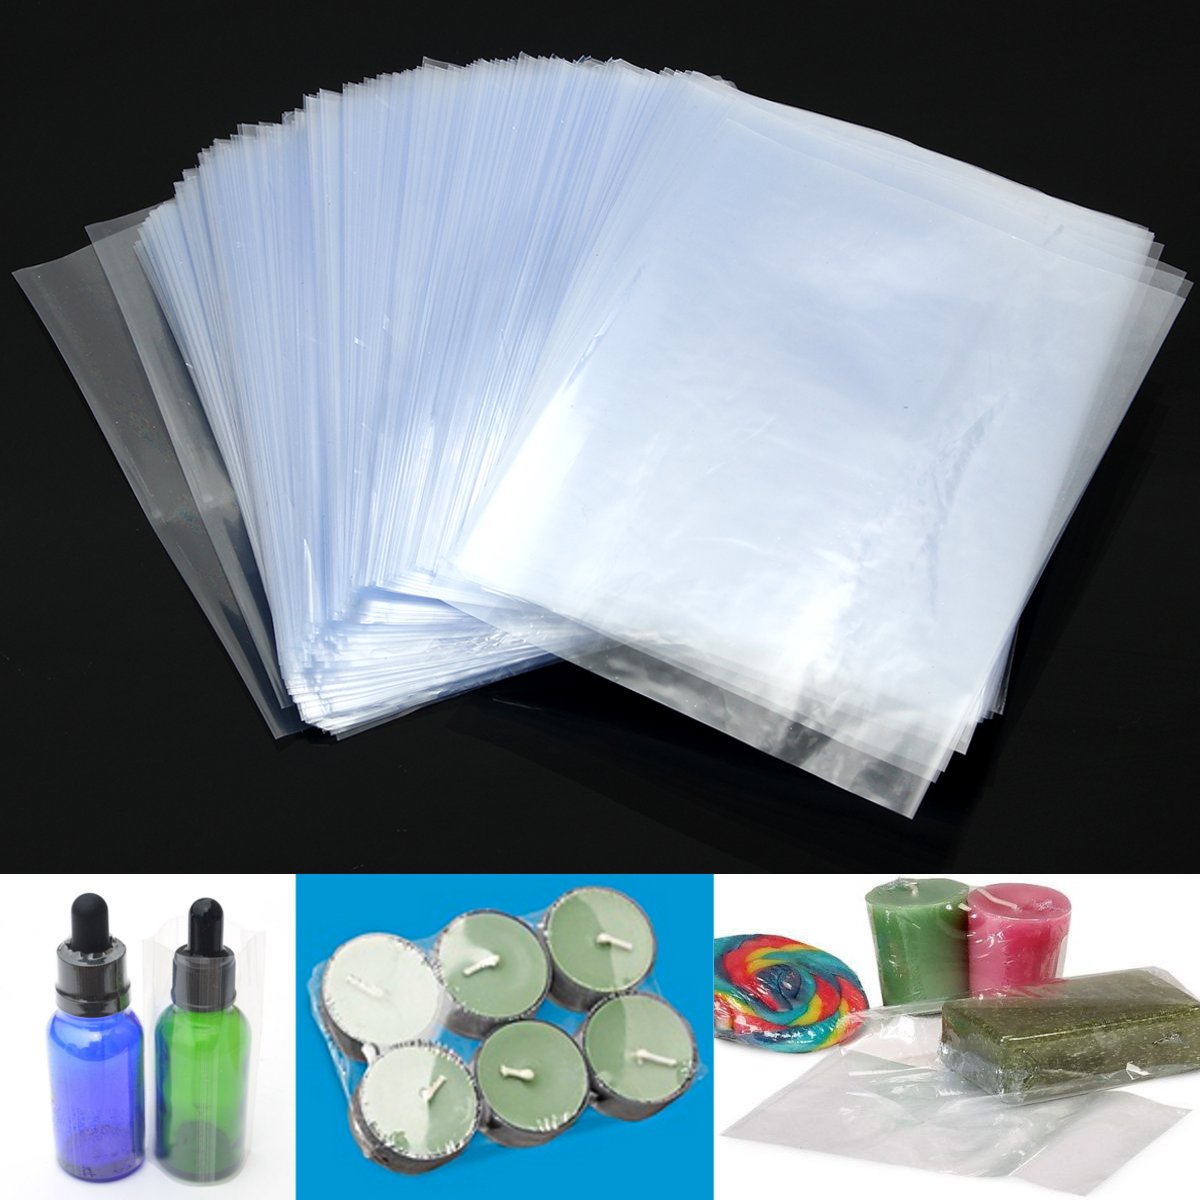 200Pcs-PVC-Heat-Shrink-Wrap-Bags-Clear-Film-DIY-Crafts-Gifts-Bottle-Packaging-Bags-1197111